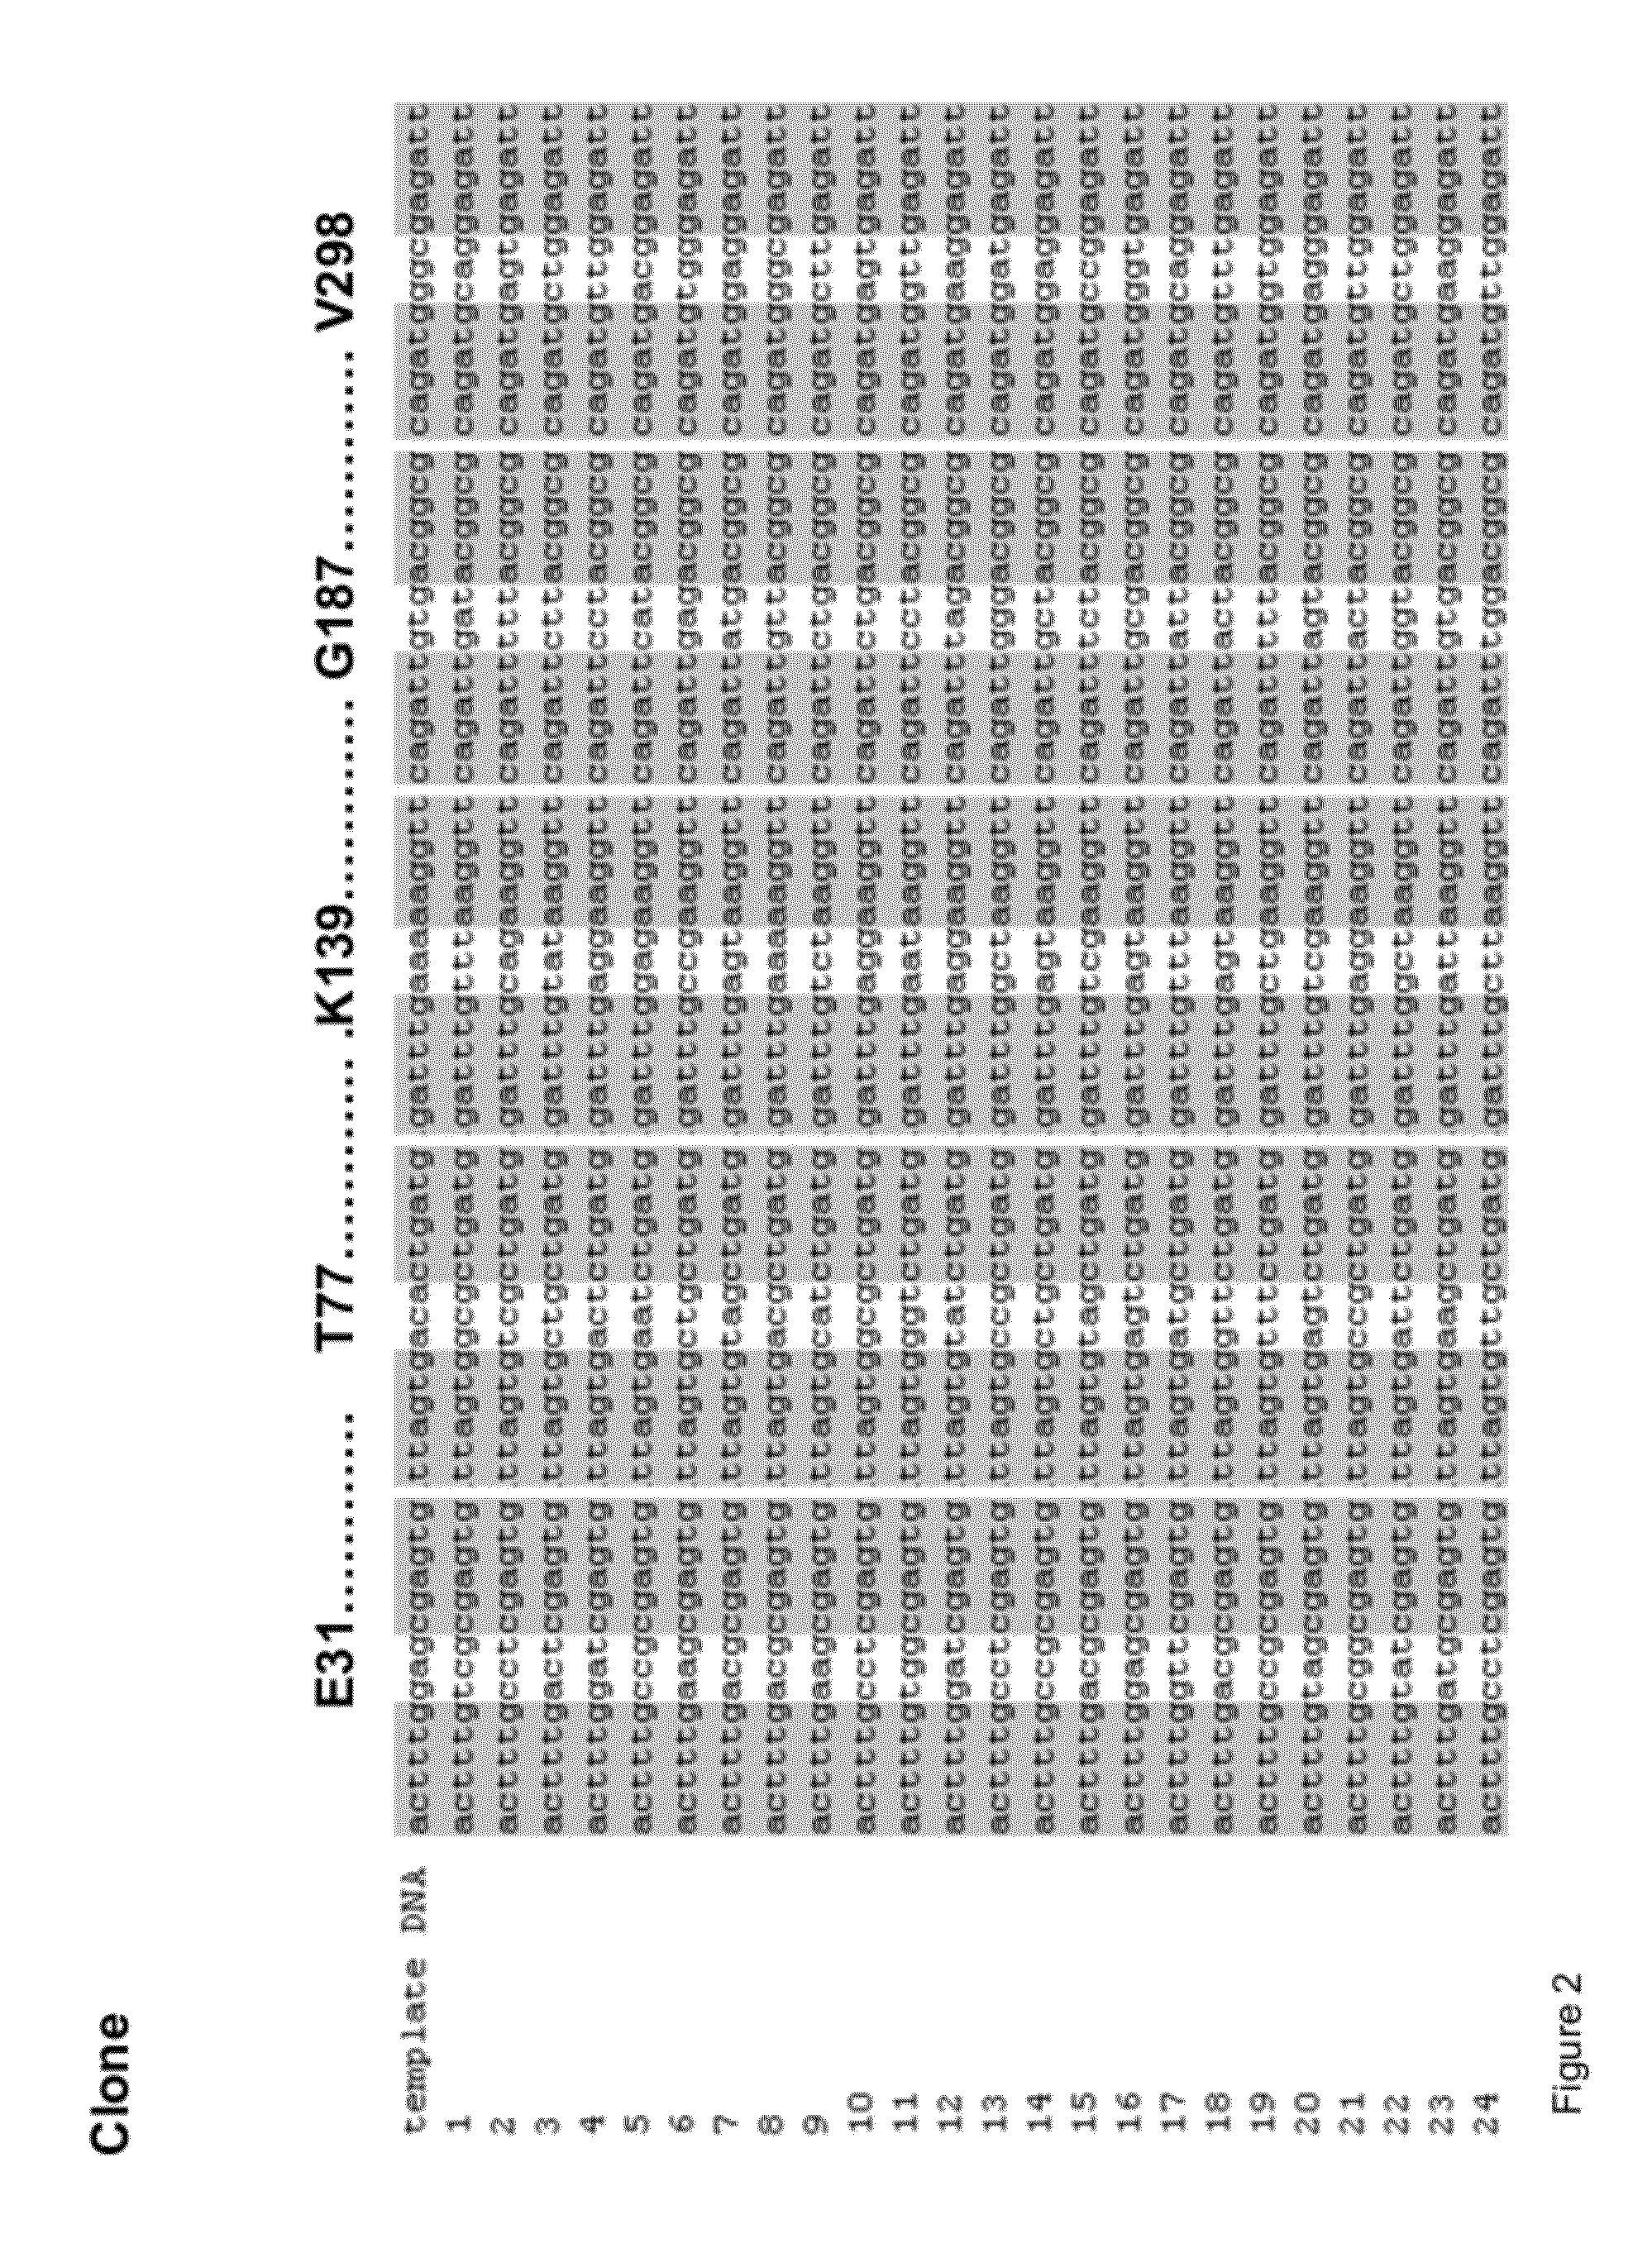 Methods and Materials for Nucleic Acid Manipulation